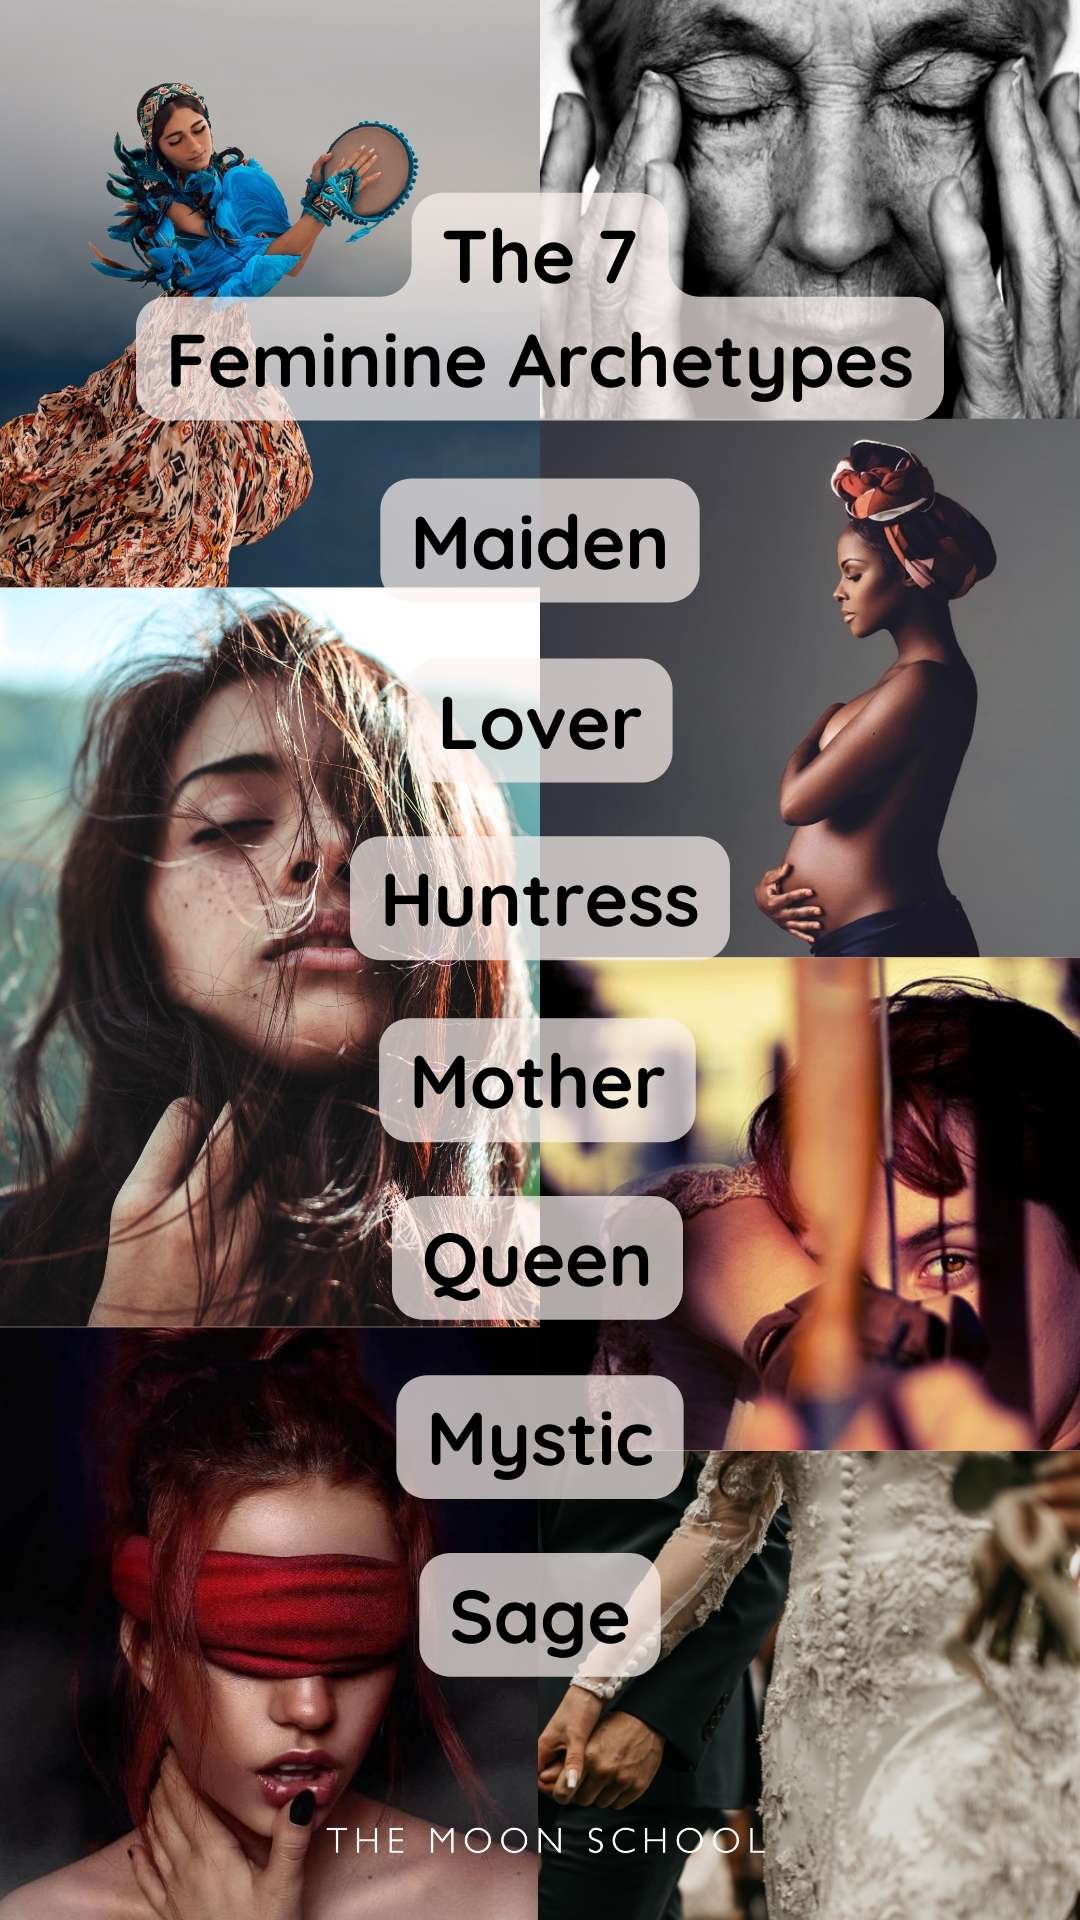 Infographic guide showing the seven feminine archetypes Maiden, Lover, Huntress, Mother, Queen, Mystic, Sage